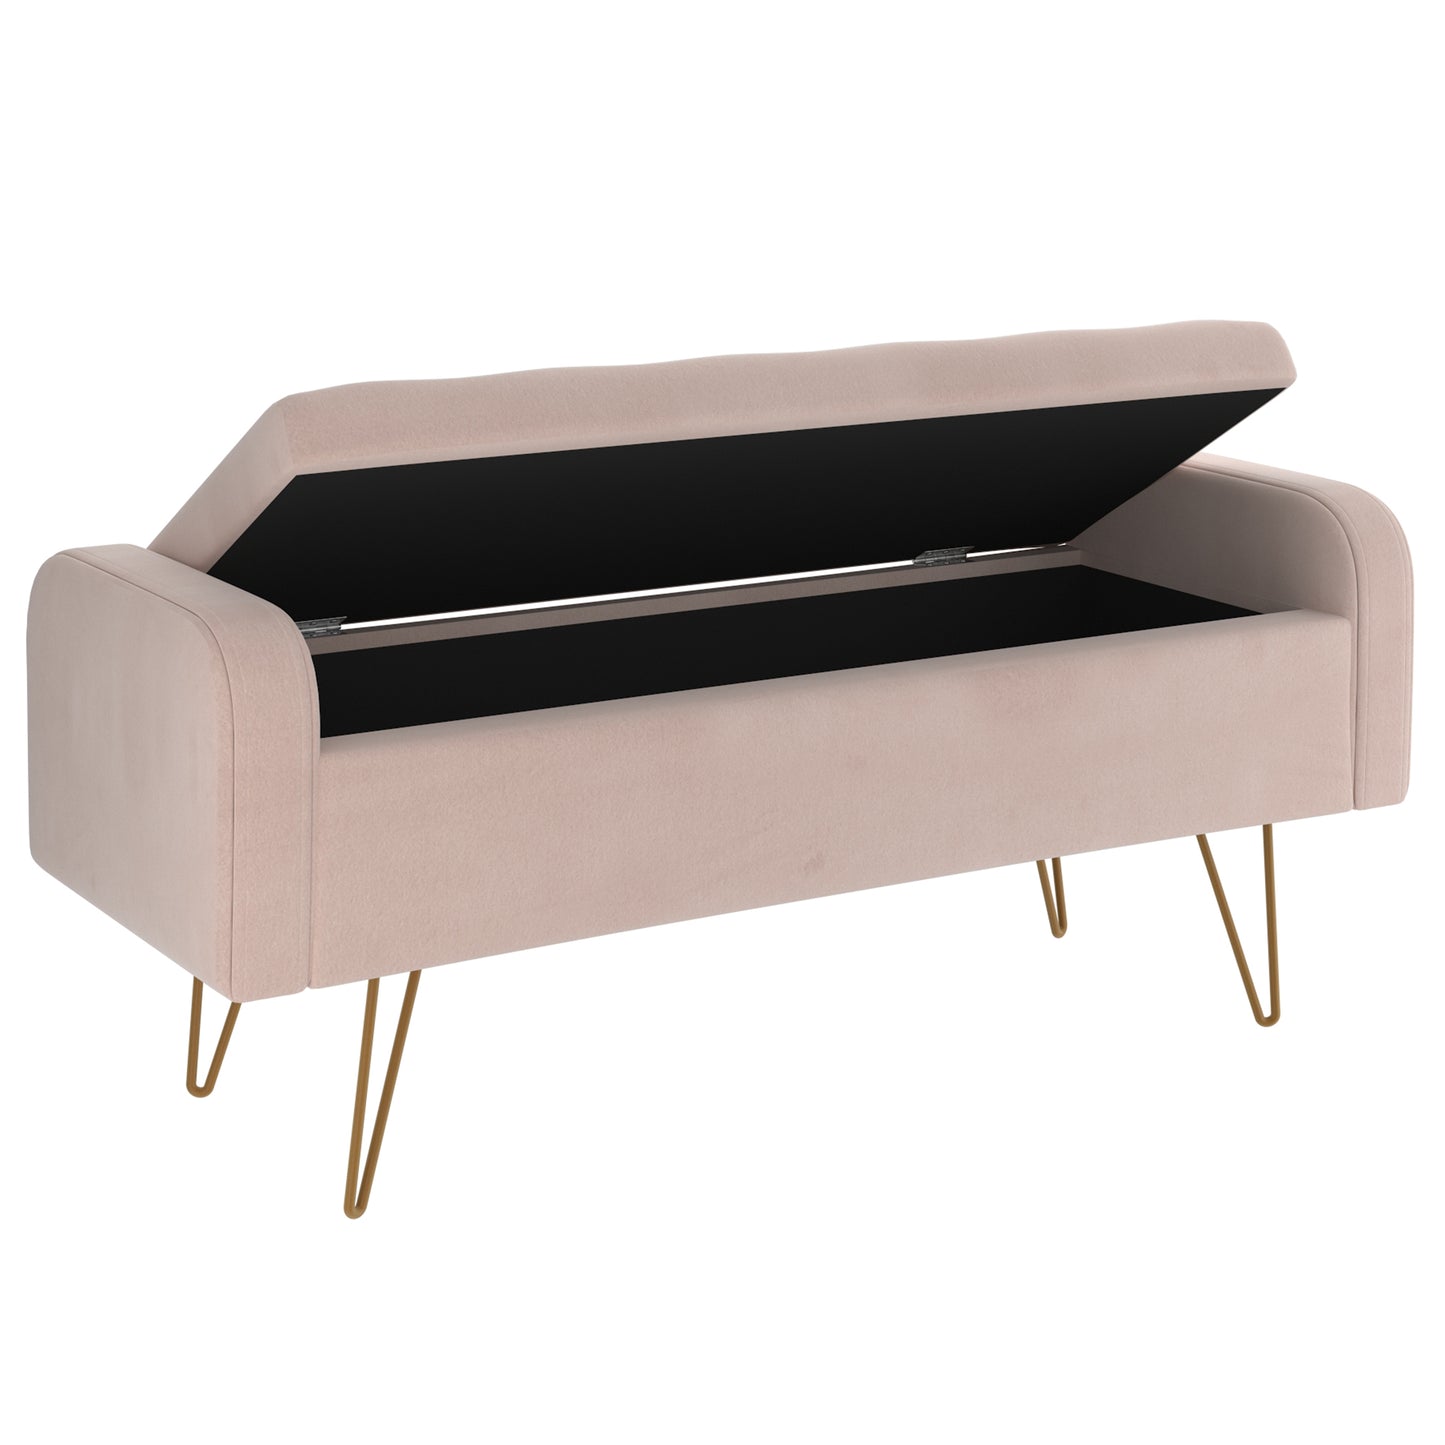 Sabel Storage Ottoman/Bench in Blush Pink and Aged Gold